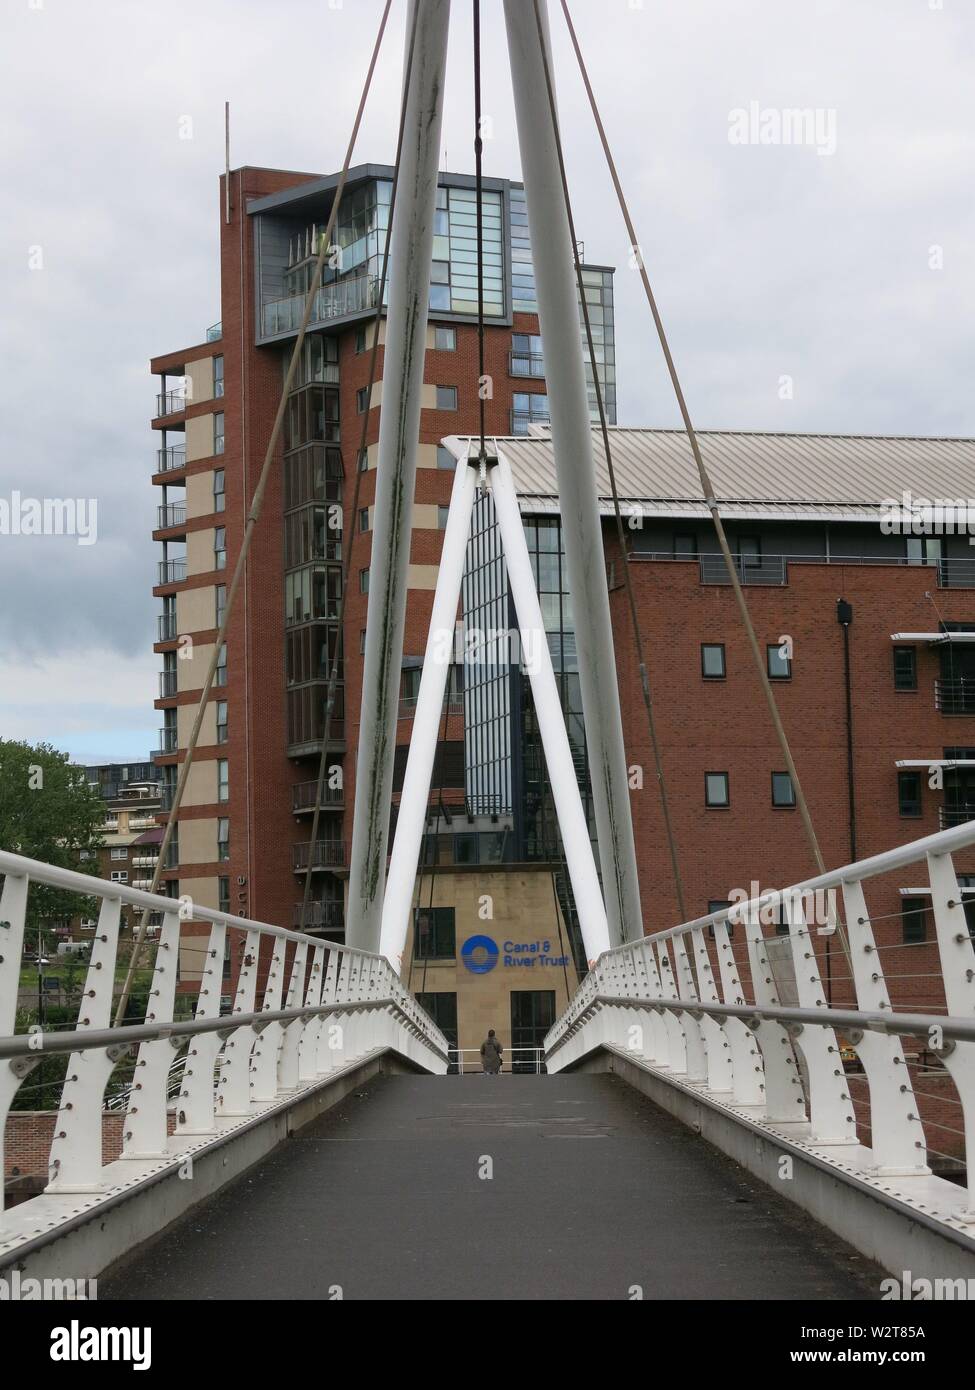 View looking along the length of the Knight's Way pedestrian footbridge over the River Aire at Leeds Dock Stock Photo